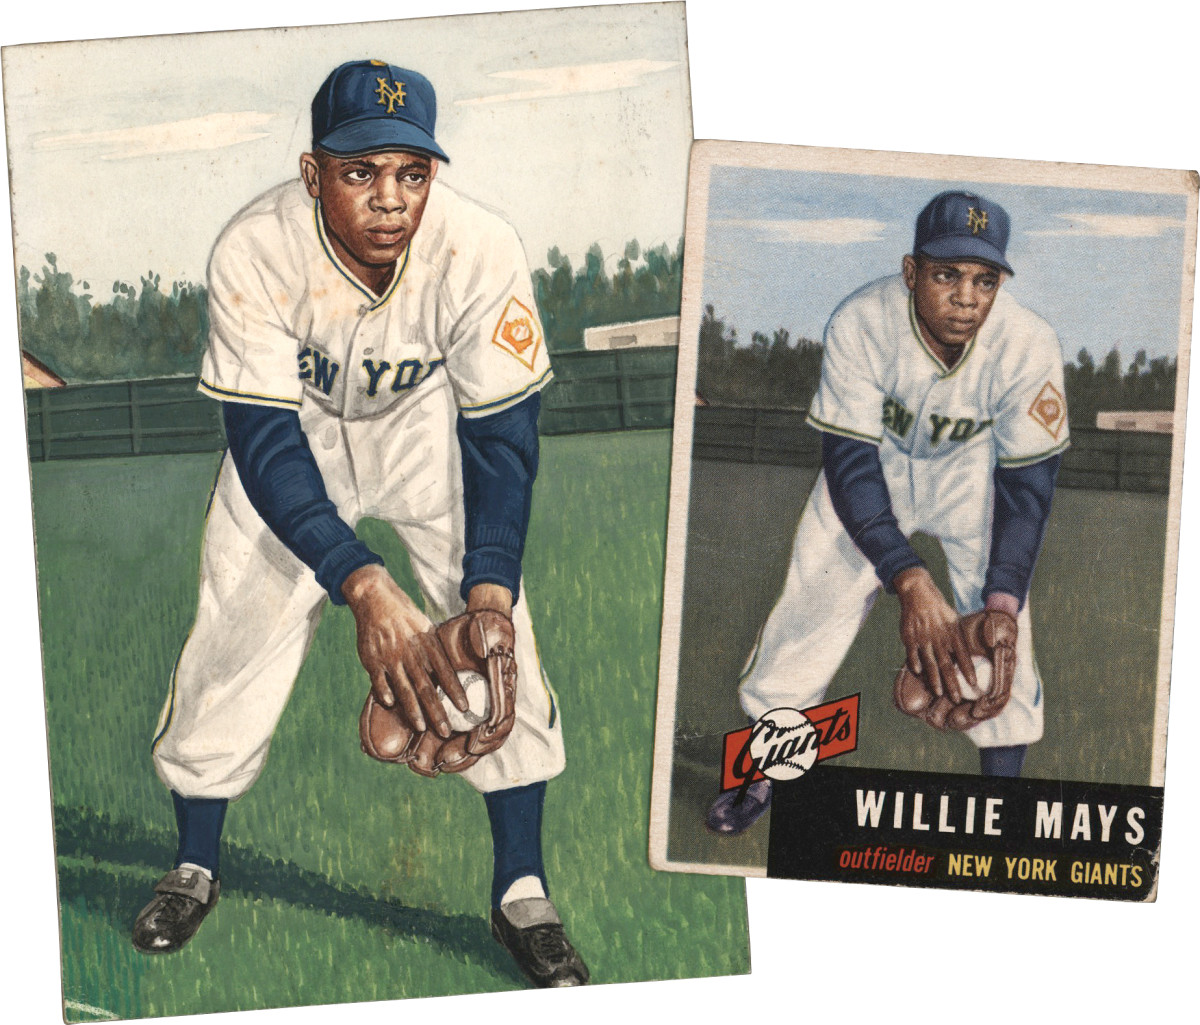 The original artwork from Willie Mays’ 1953 Topps card.